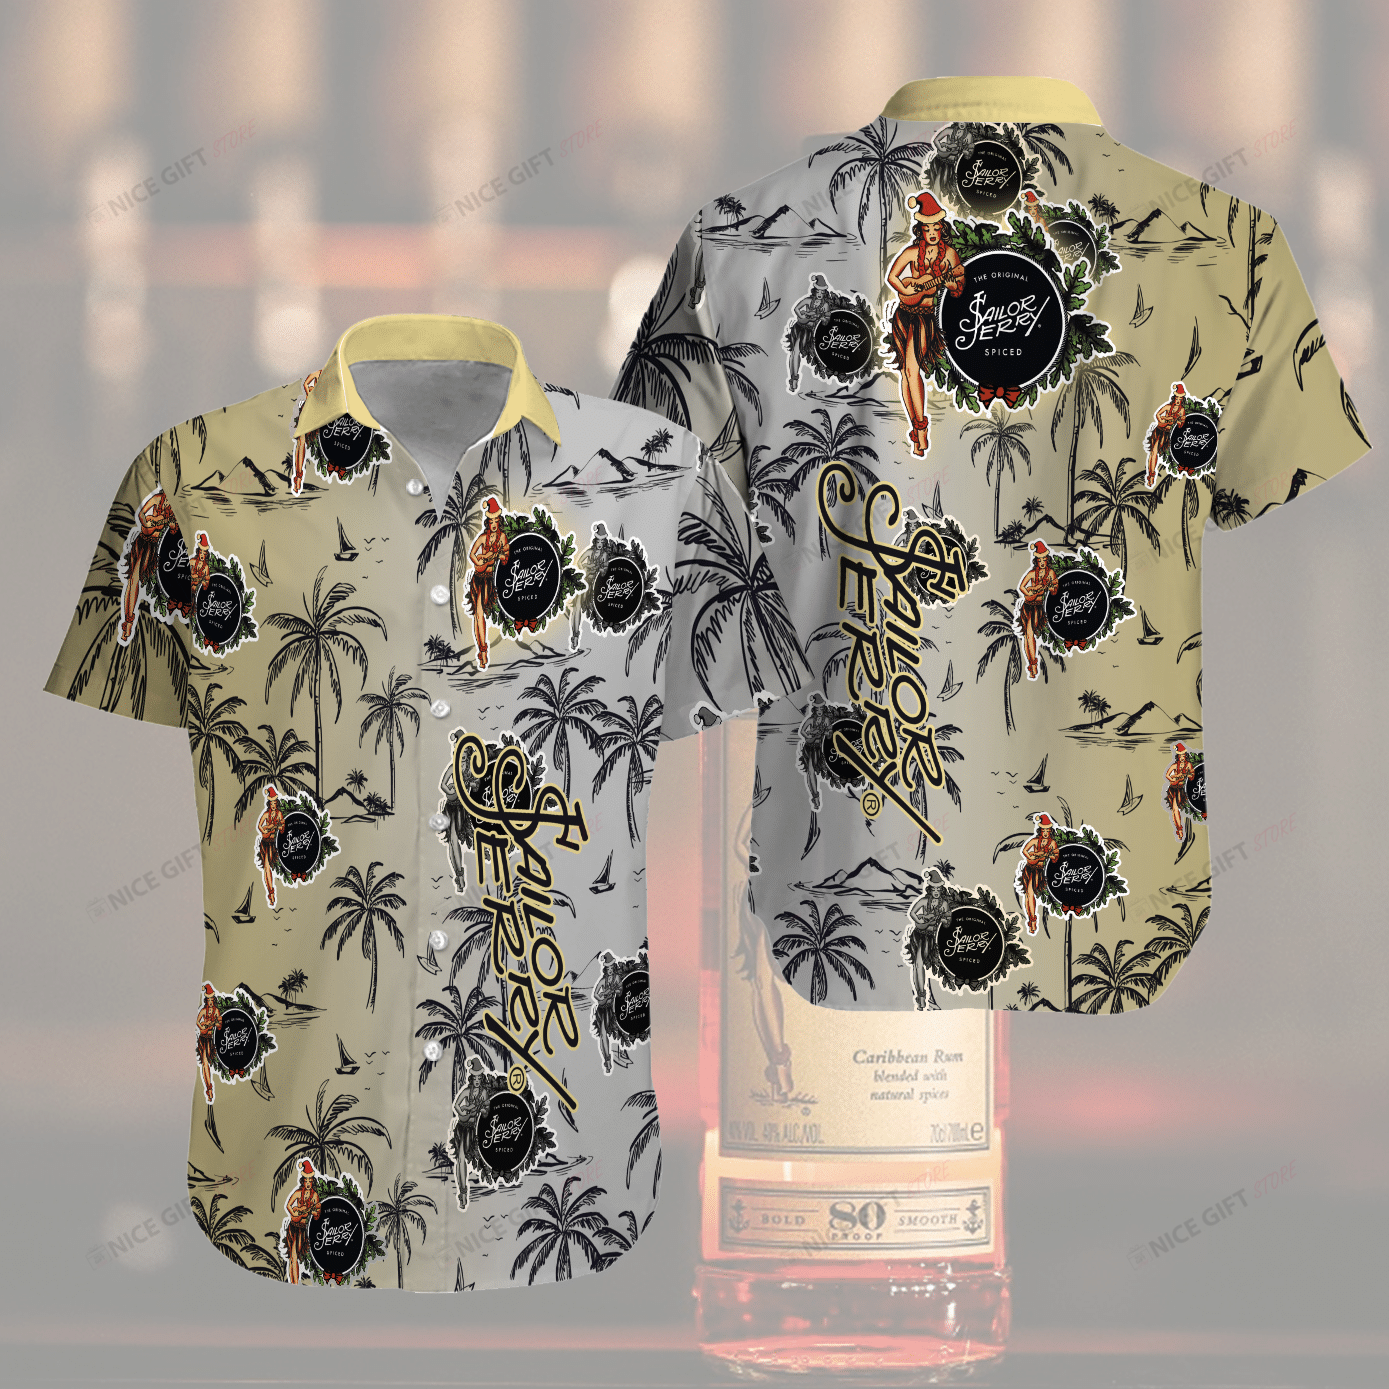 Top Hawaiian Shirt 2022 you'll be happy that you bought them in advance 9